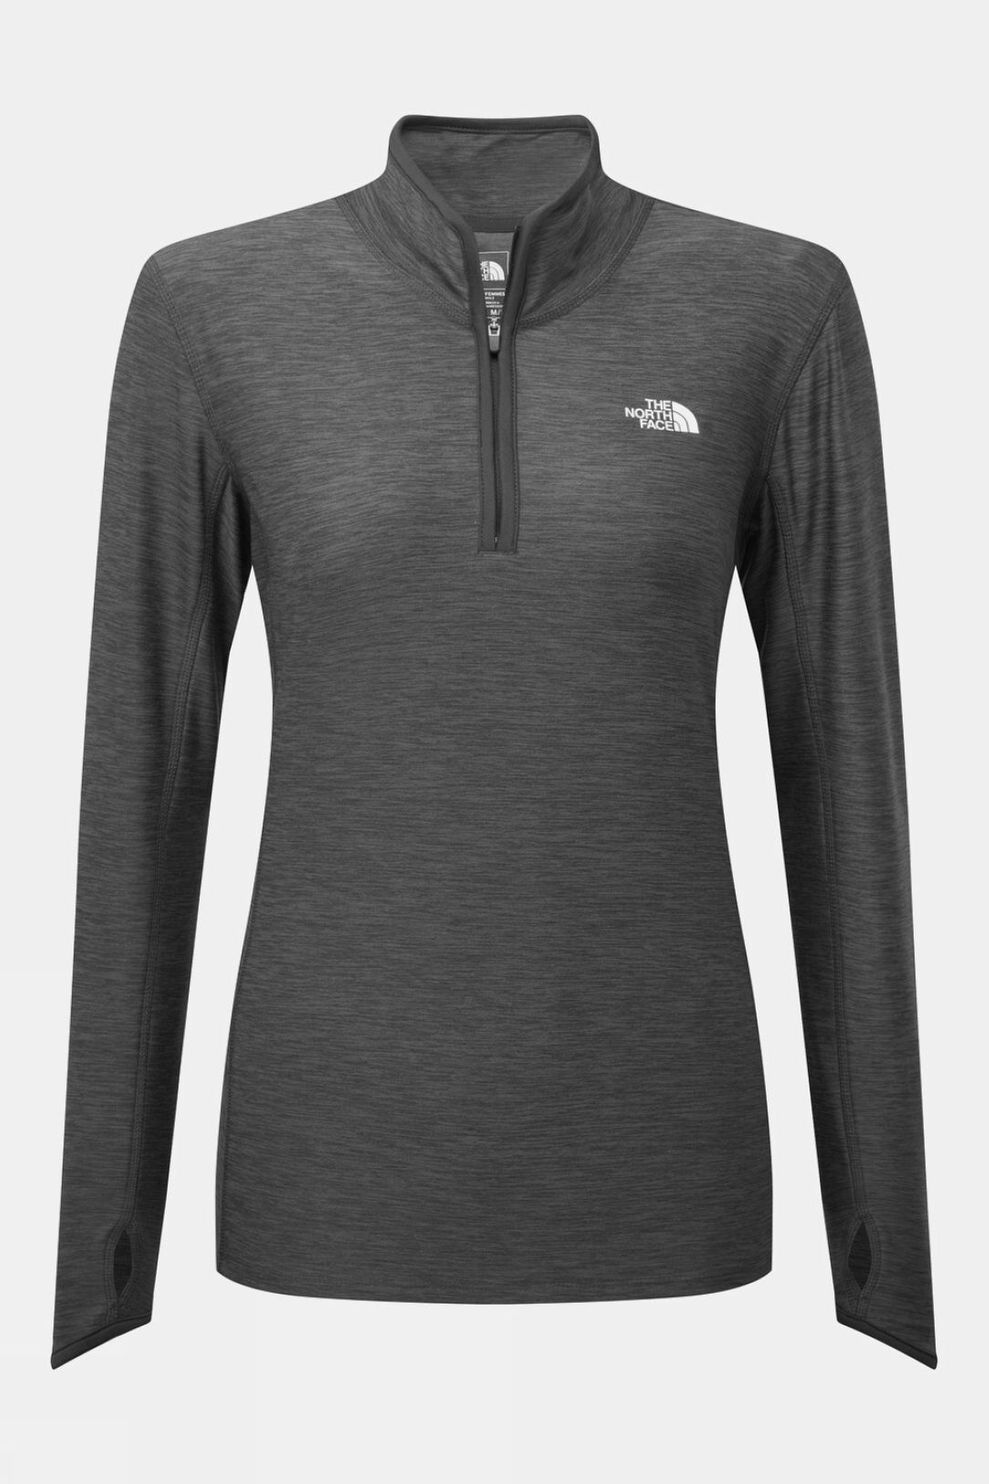 The North Face Womens Motivation 1/4 Zip Top